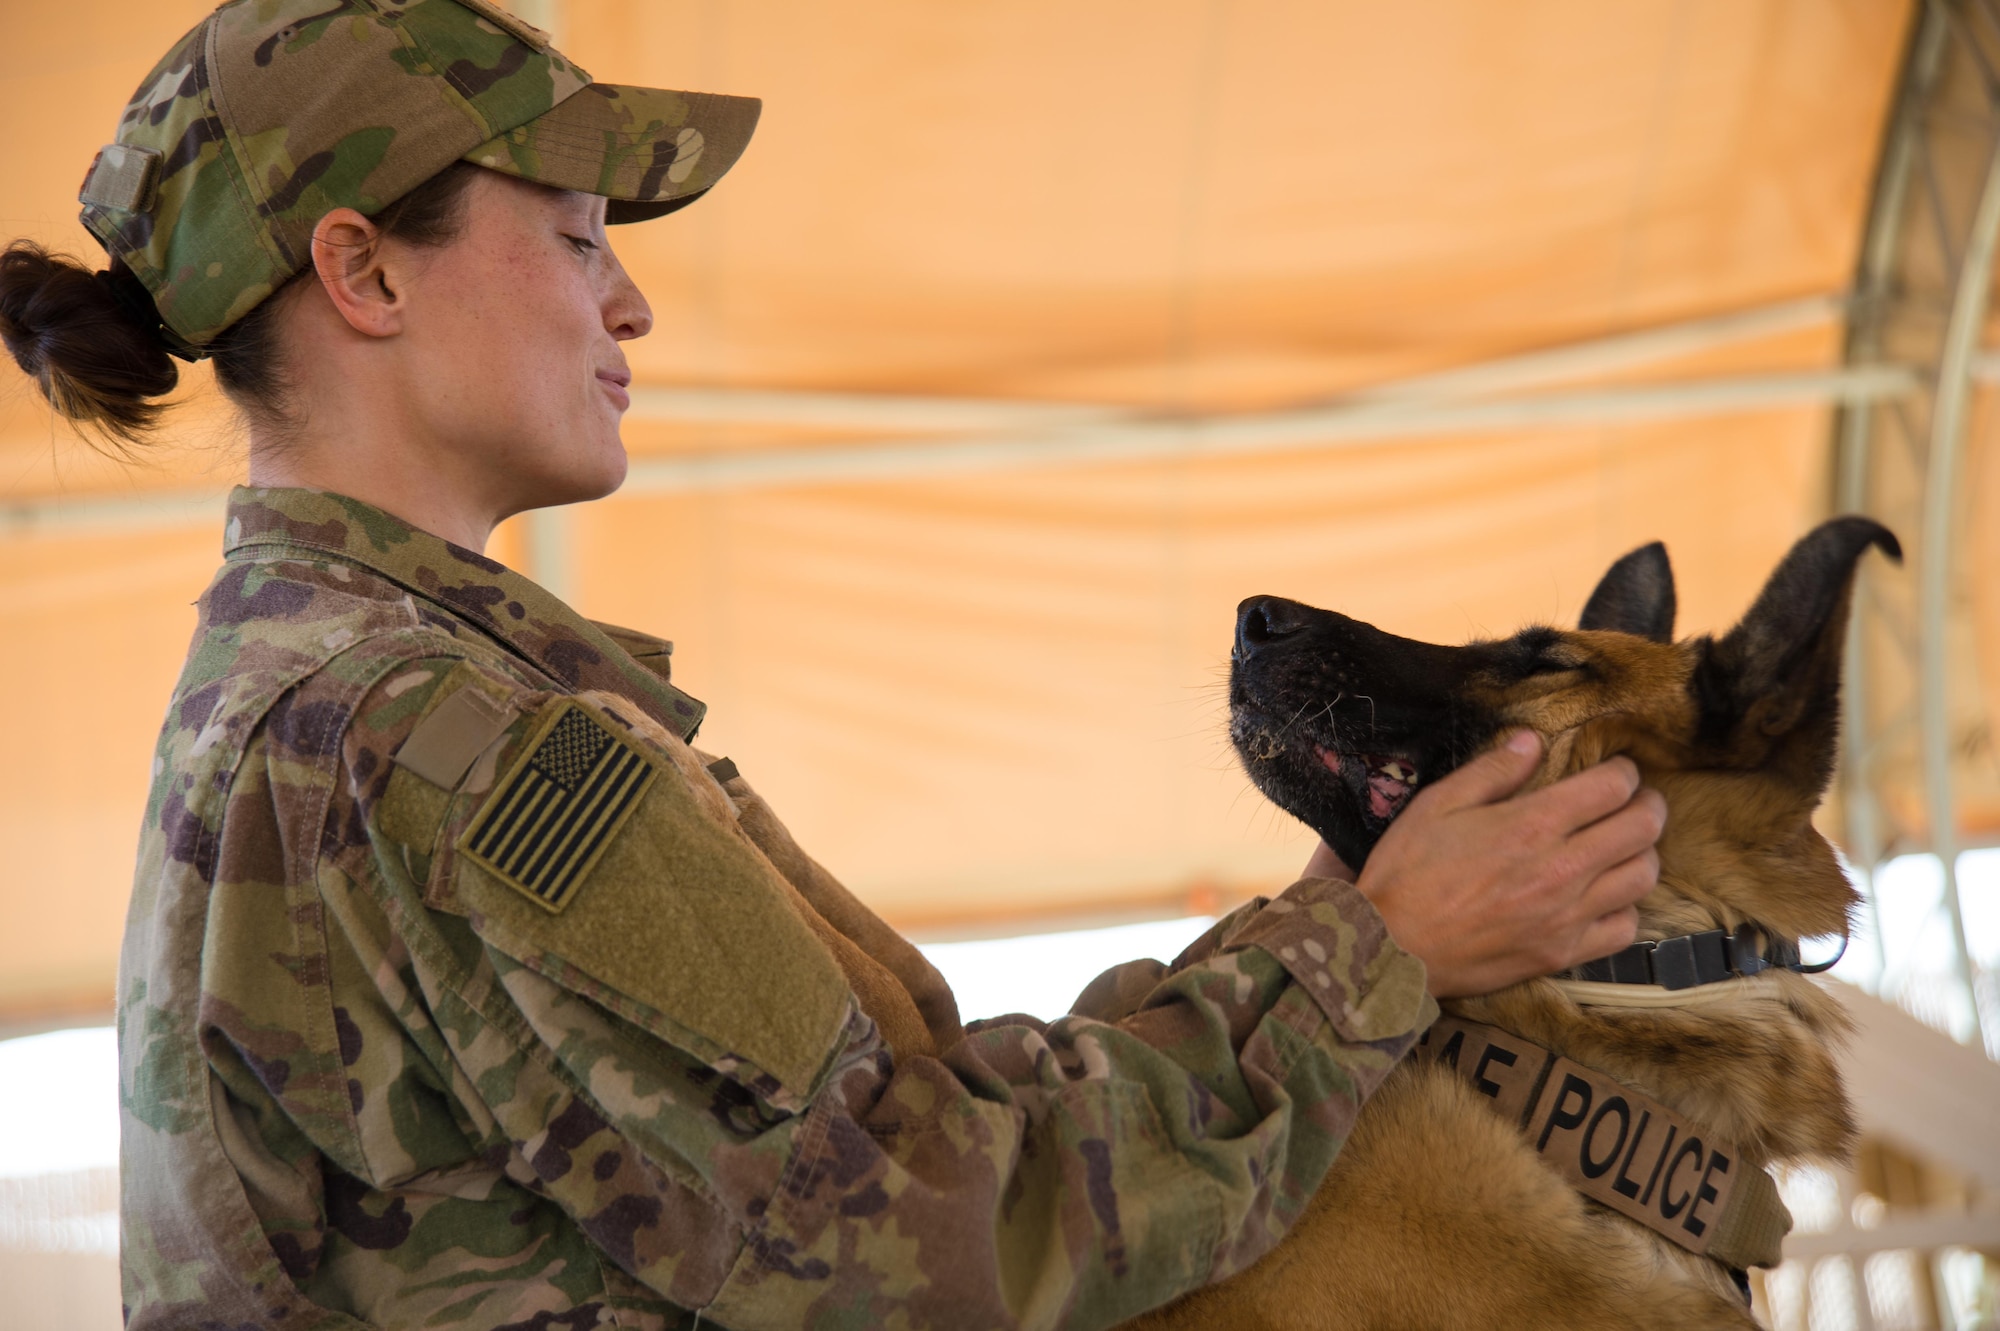 Handlers practice controlled aggression training with military working dogs in order to deal with hostile people.